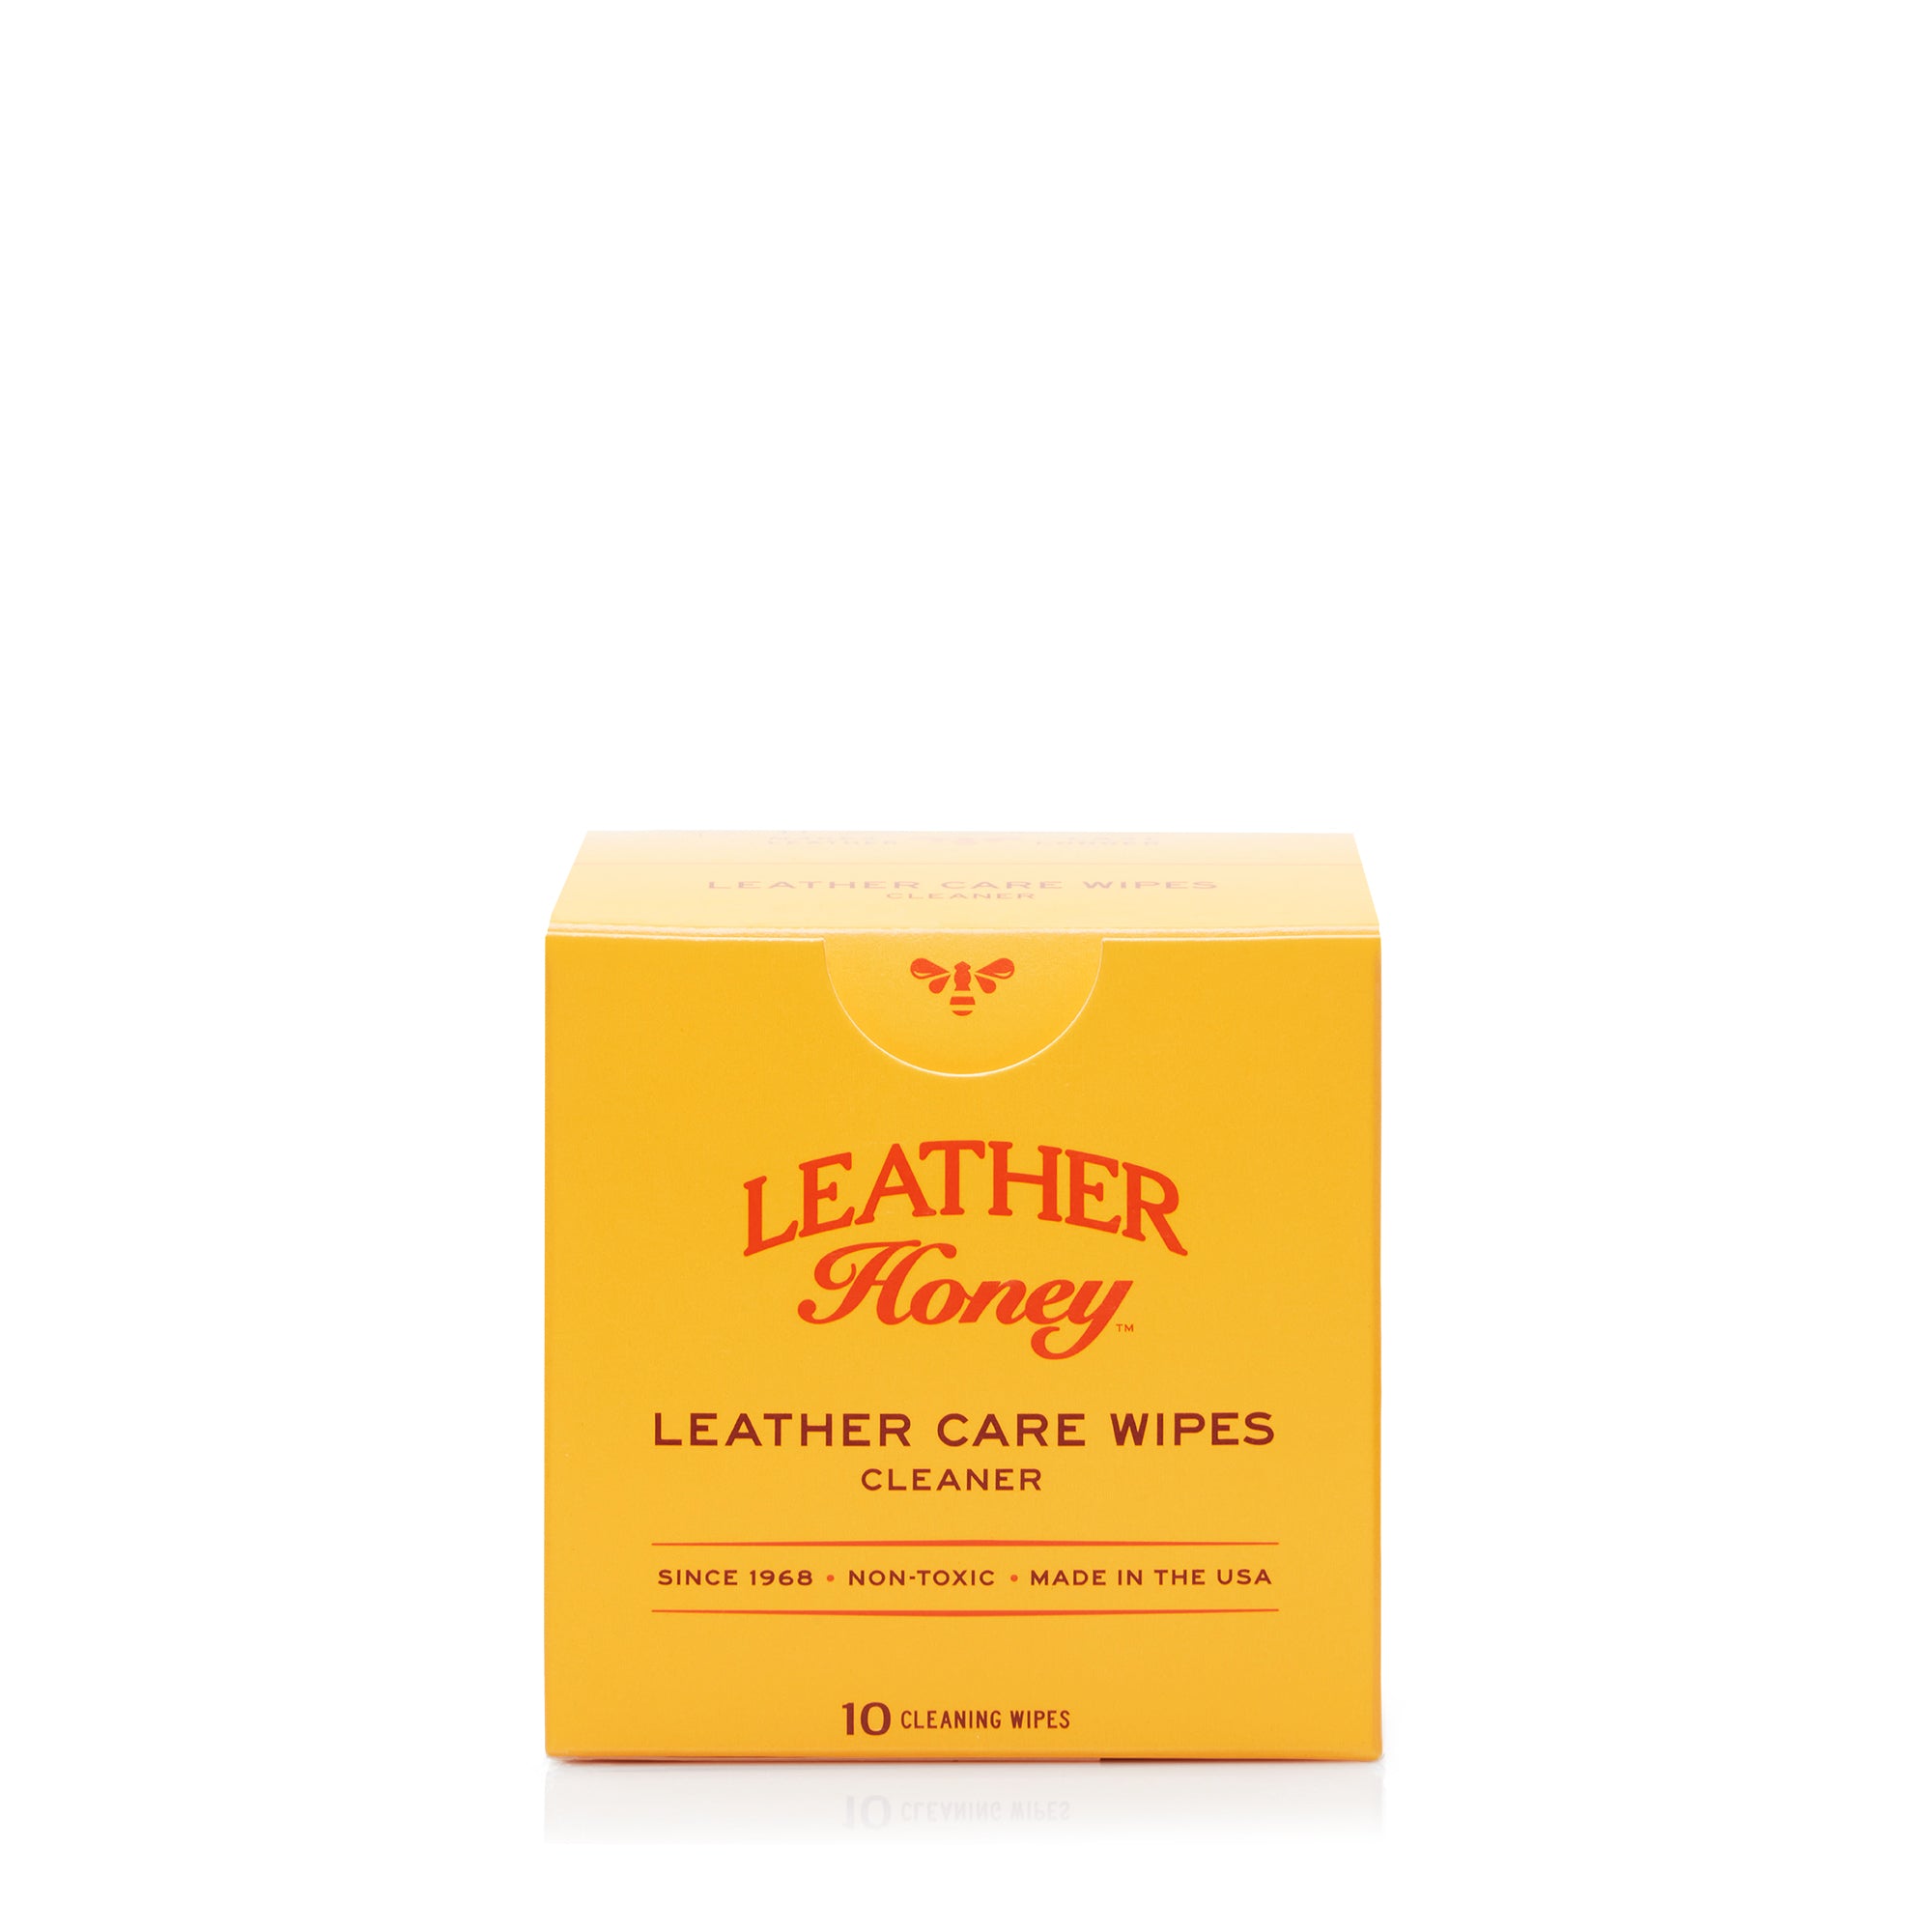 How to Use Leather Honey Leather Conditioning Wipes